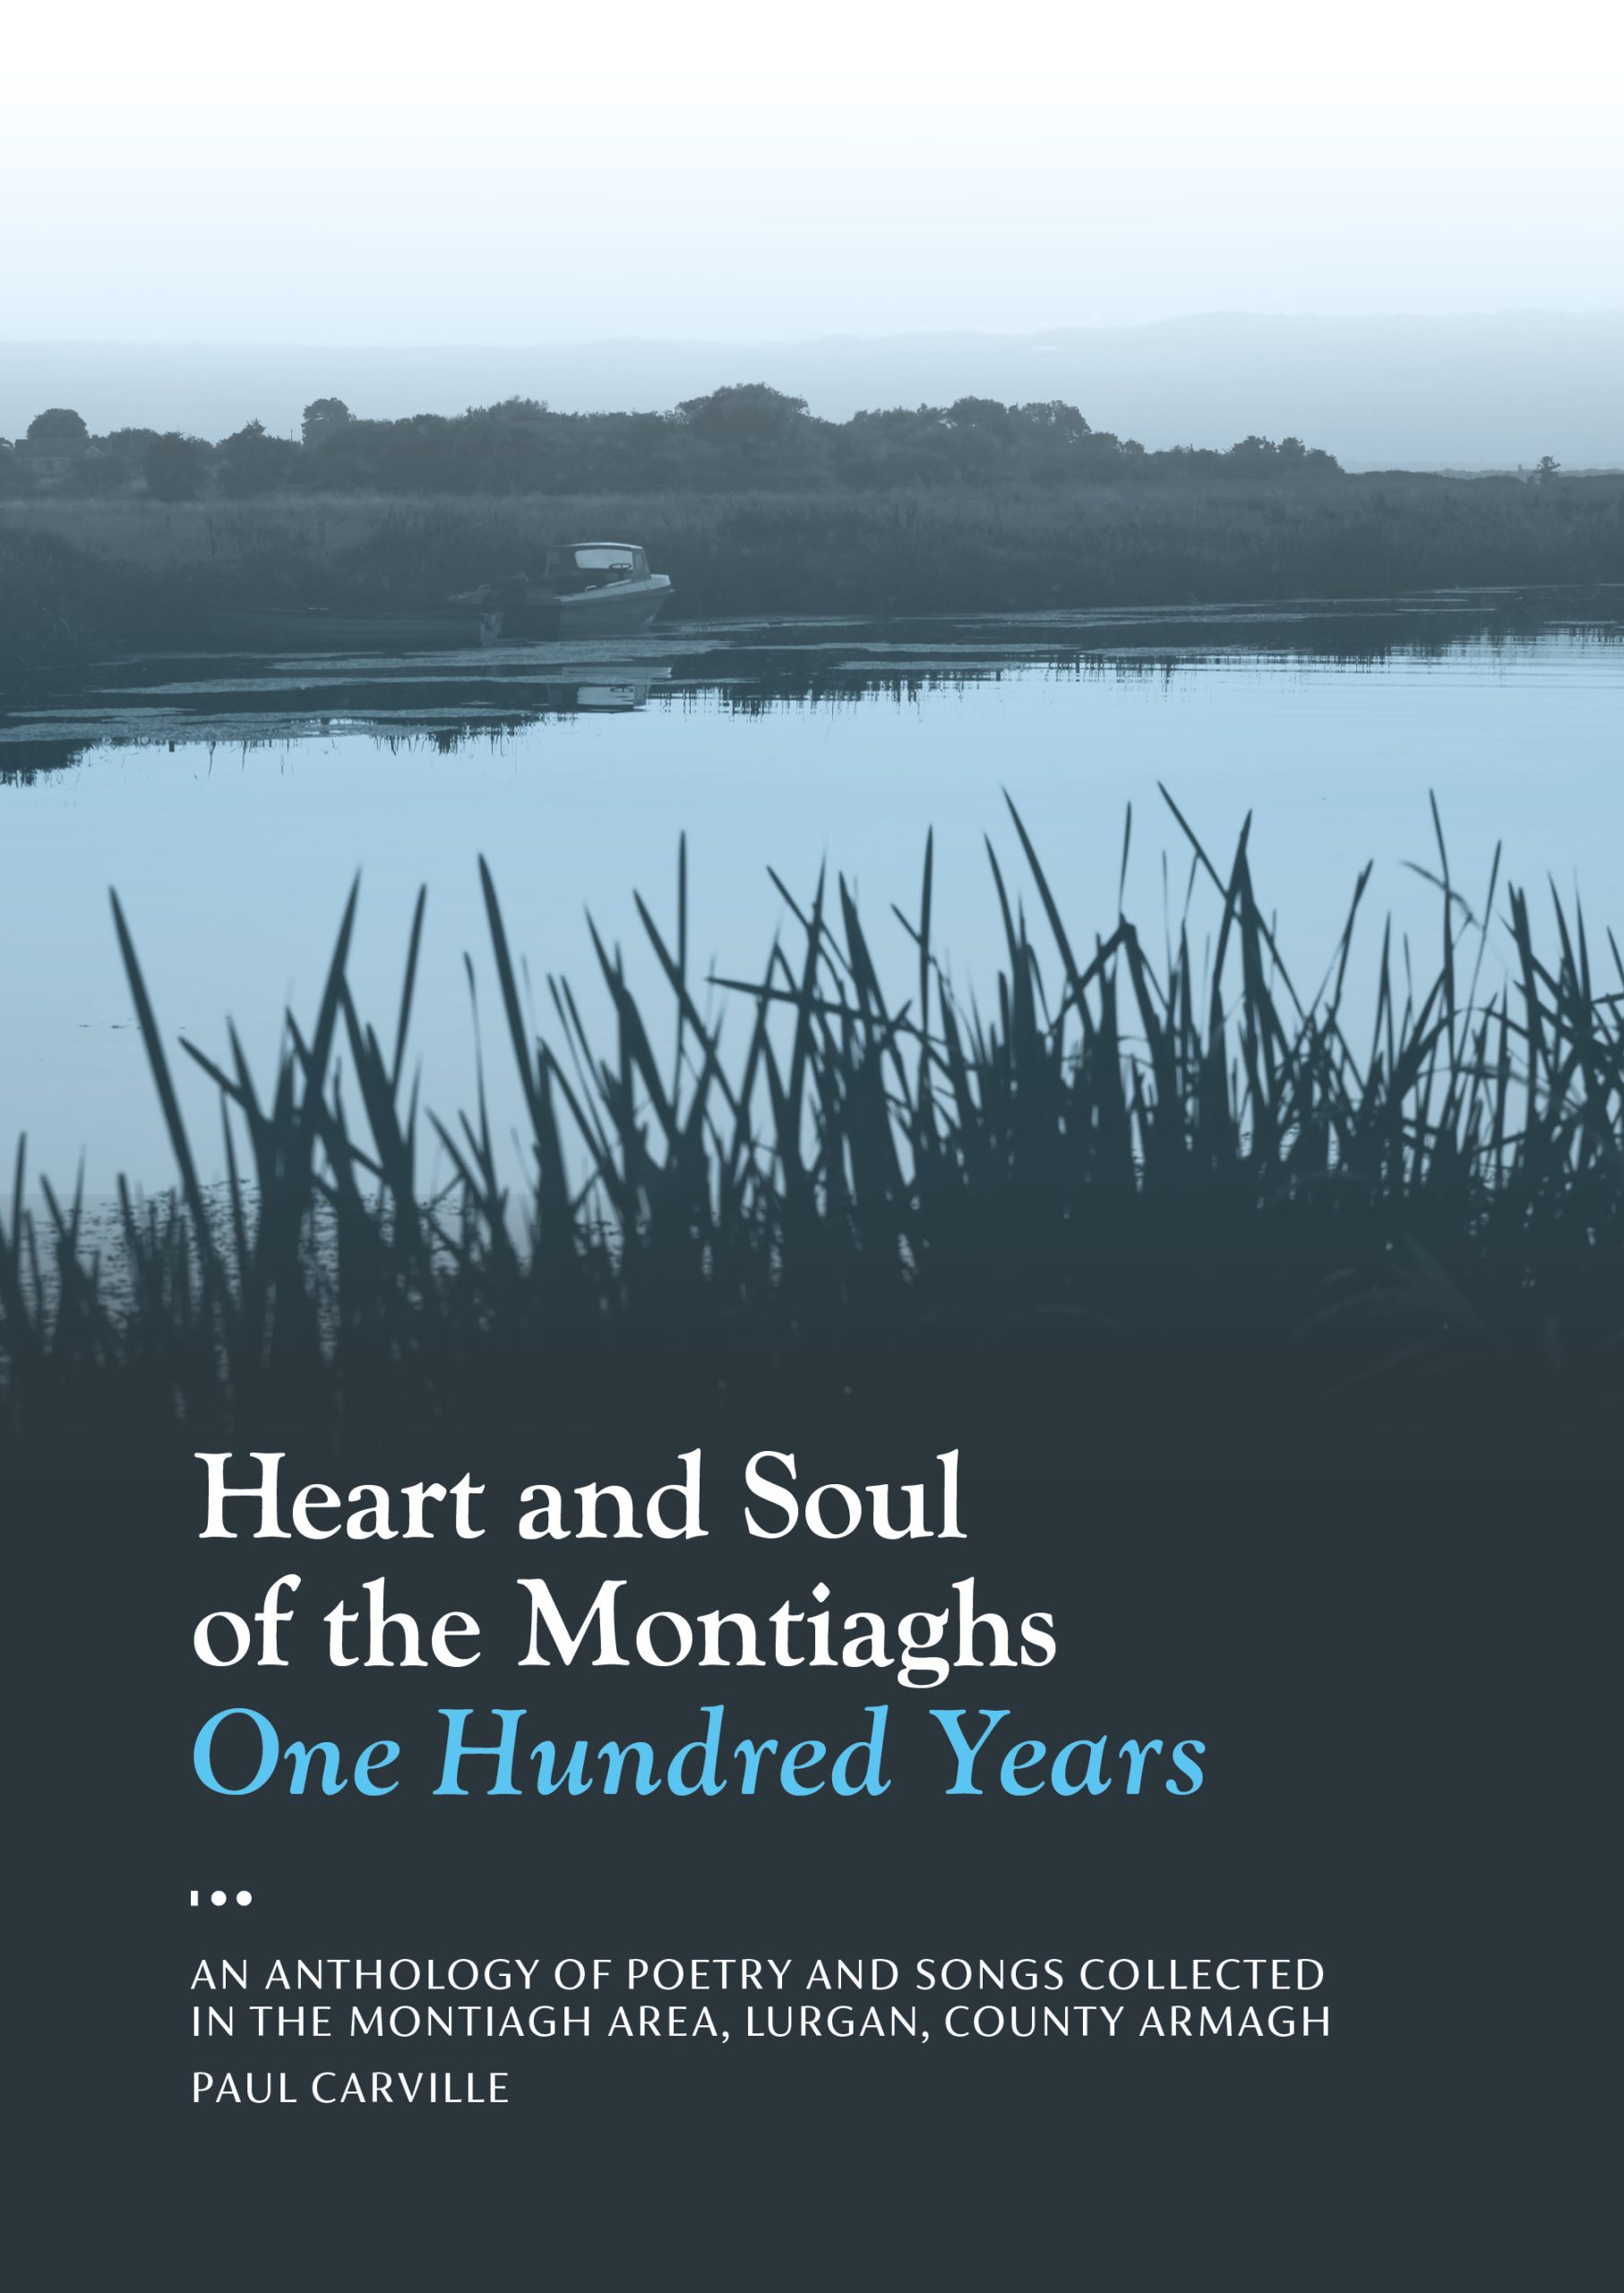 COMING SOON: Launch of the ‘Heart and Soul of the Montiaghs’ Poetry and Song Book